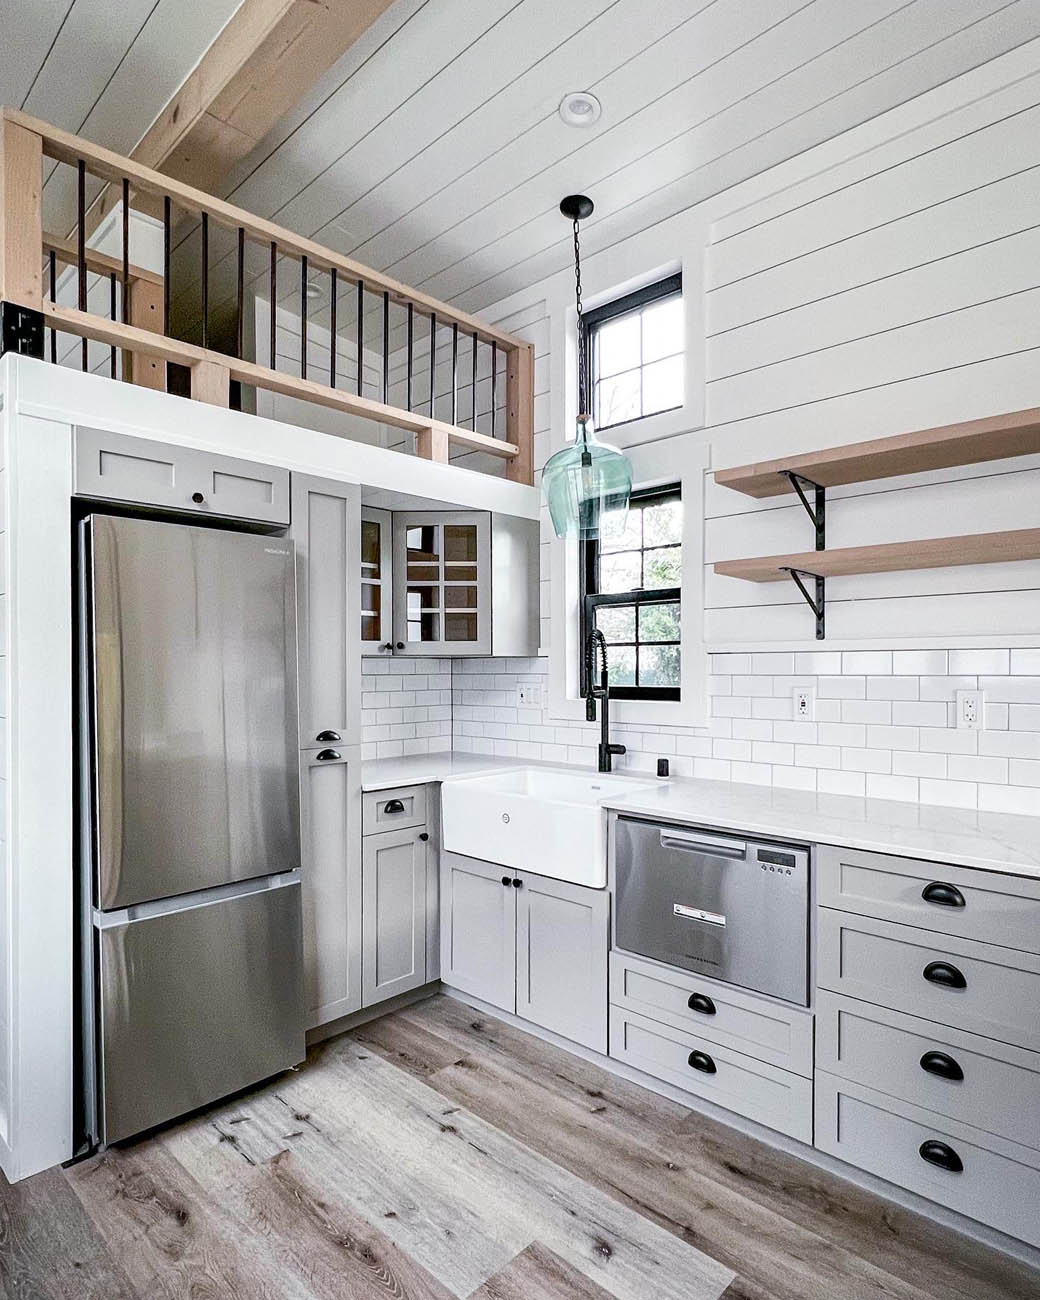 A Anchored Tiny Homes modern tiny home, build by our custom small home builder in Bend / Redmond.